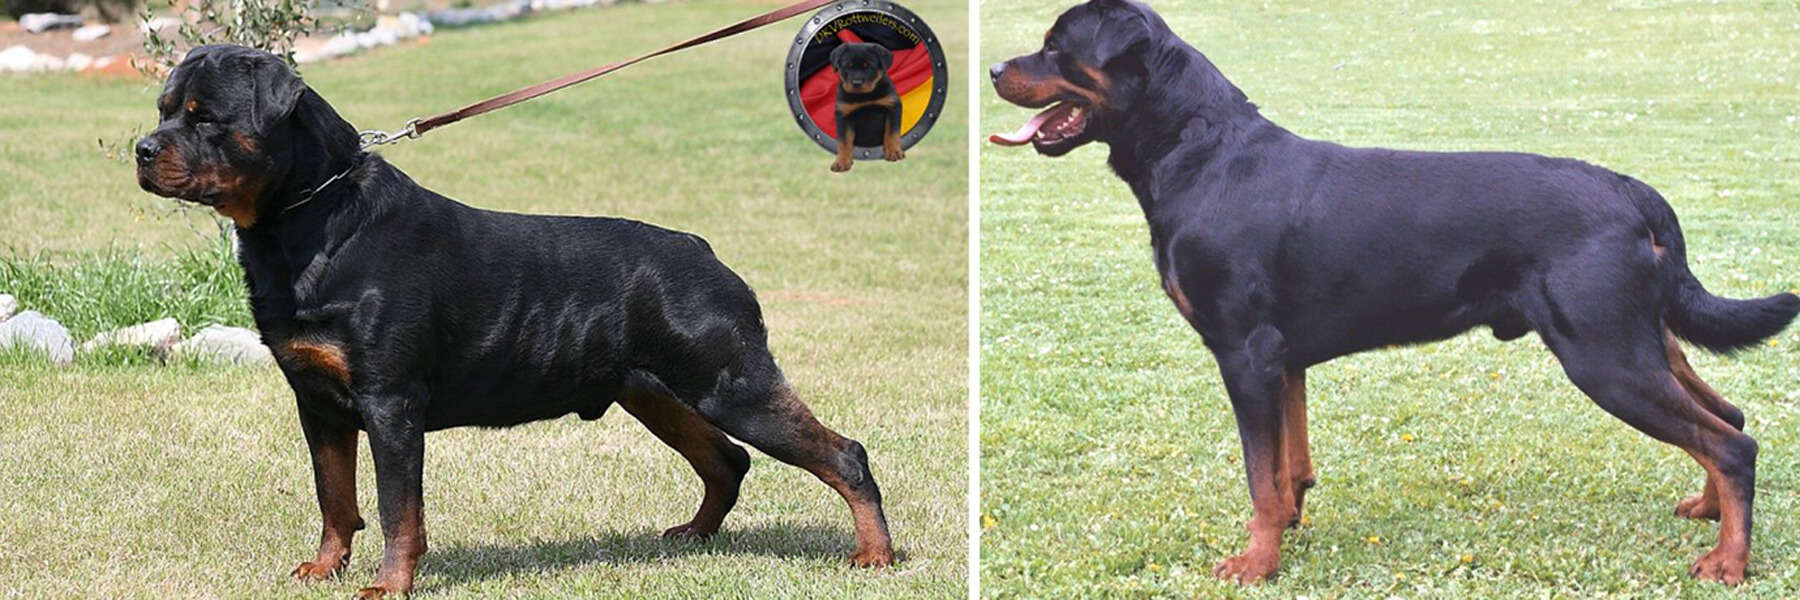 Natural vs a Docked Tail Rottweiler